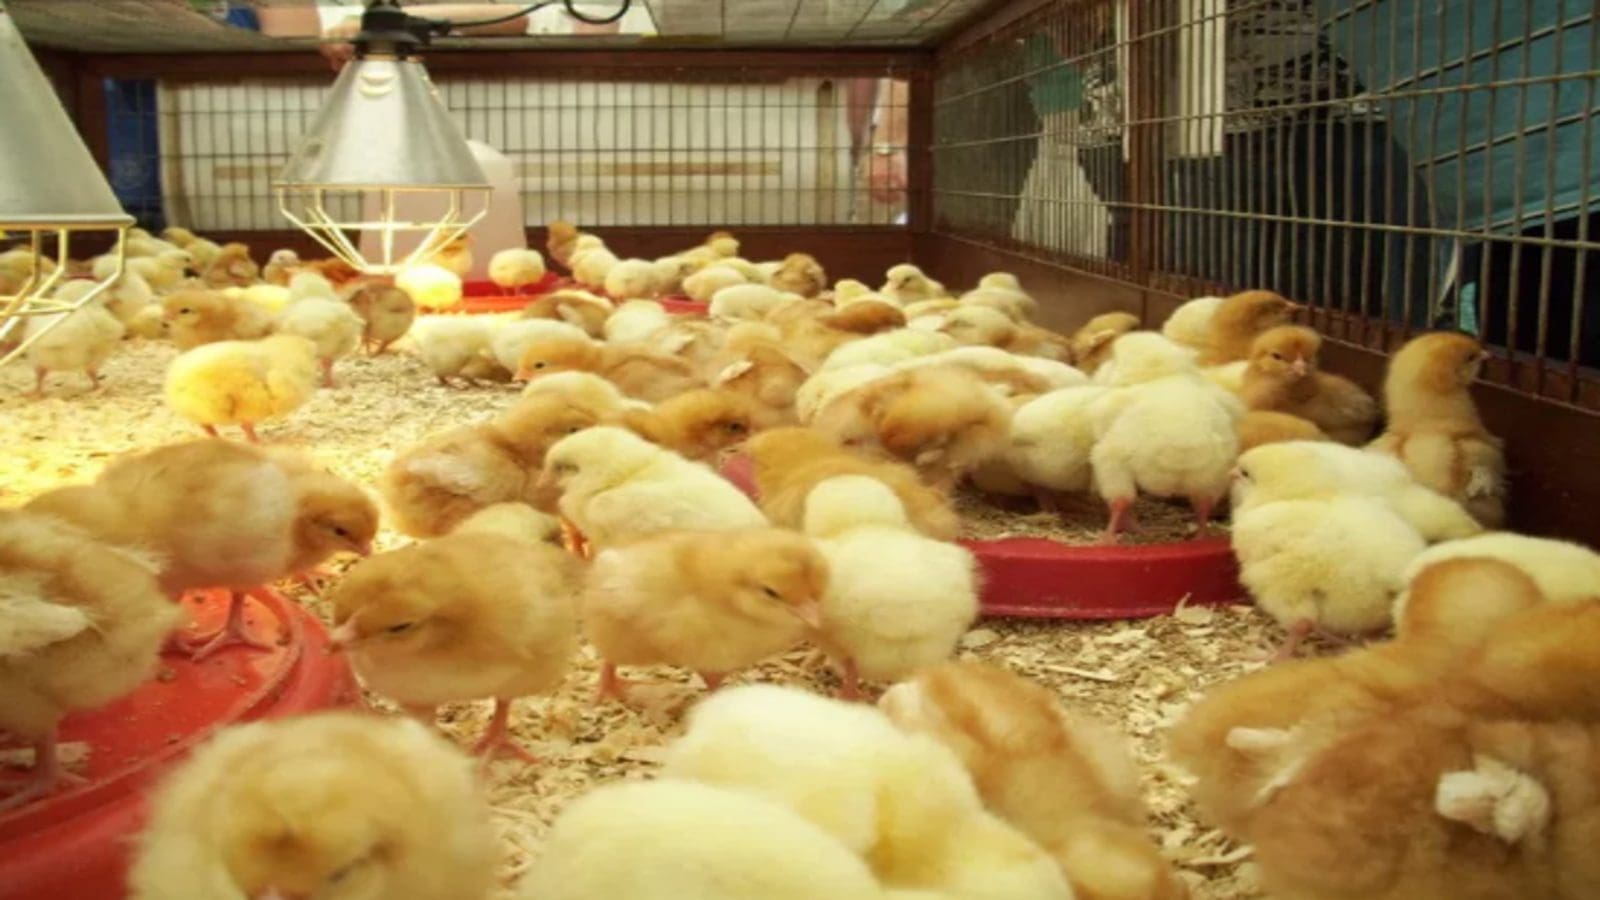 NIAS considers introduction of regulations to man poultry sector